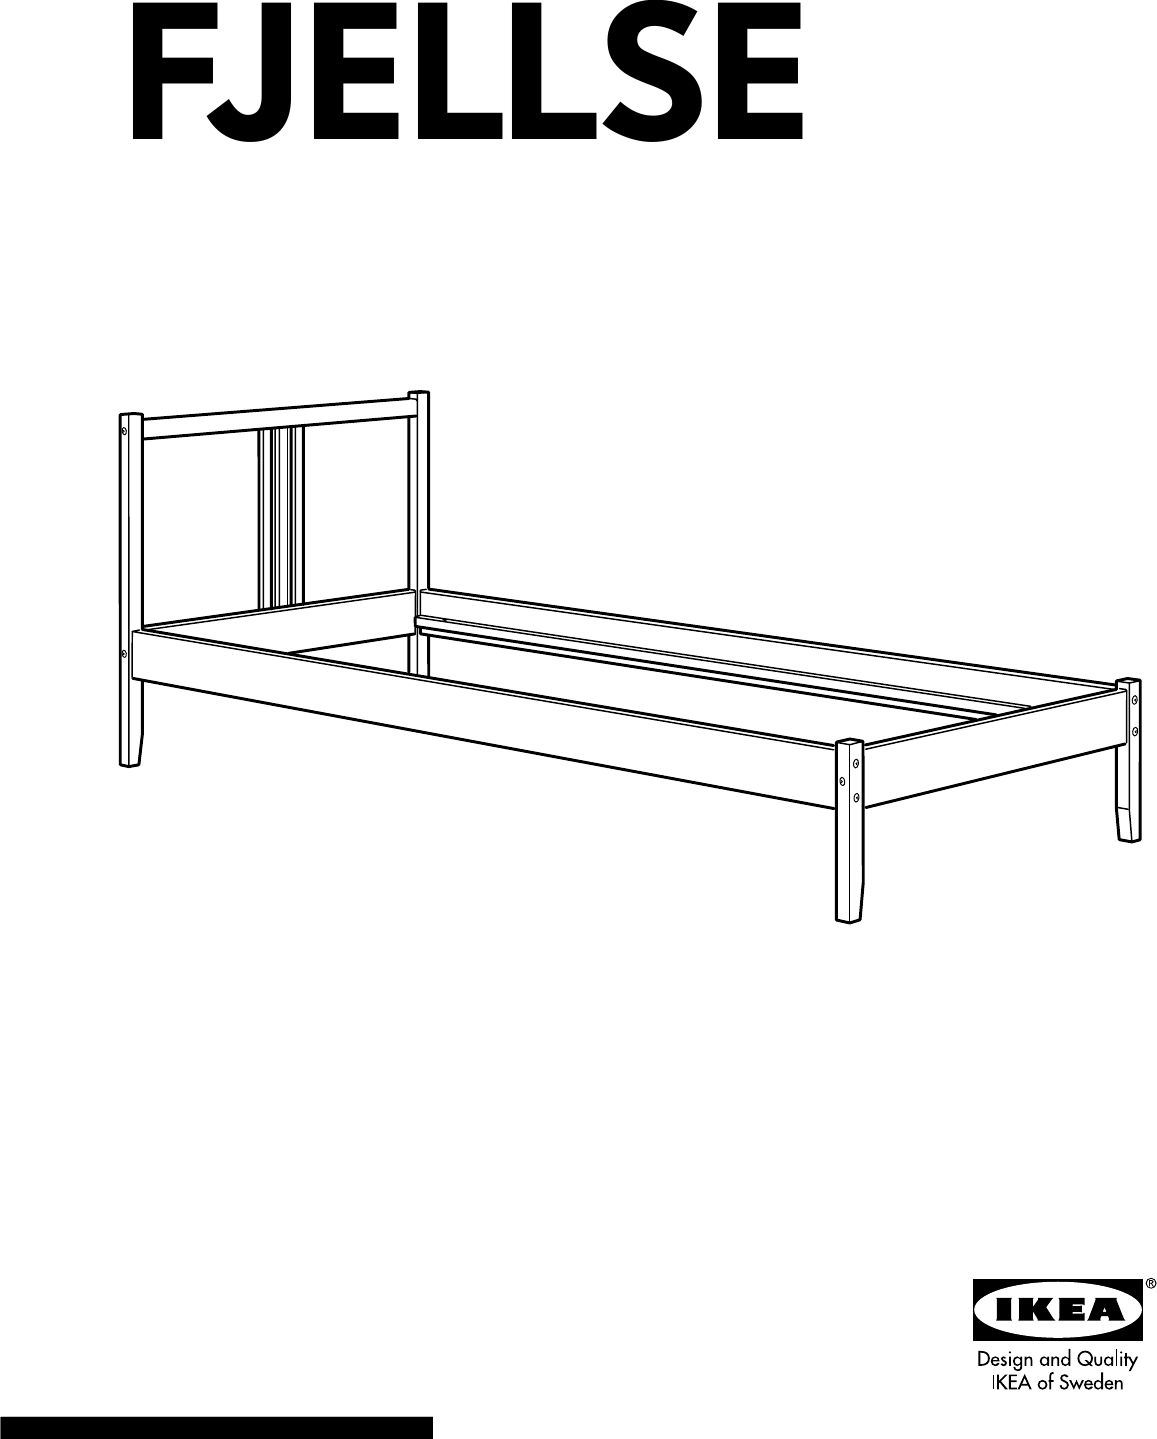 Page 1 of 12 - Ikea Ikea-Fjellse-Bed-Frame-Tw-Instructions-Manual-822426 ManualsLib - Makes It Easy To Find Manuals Online! User Manual